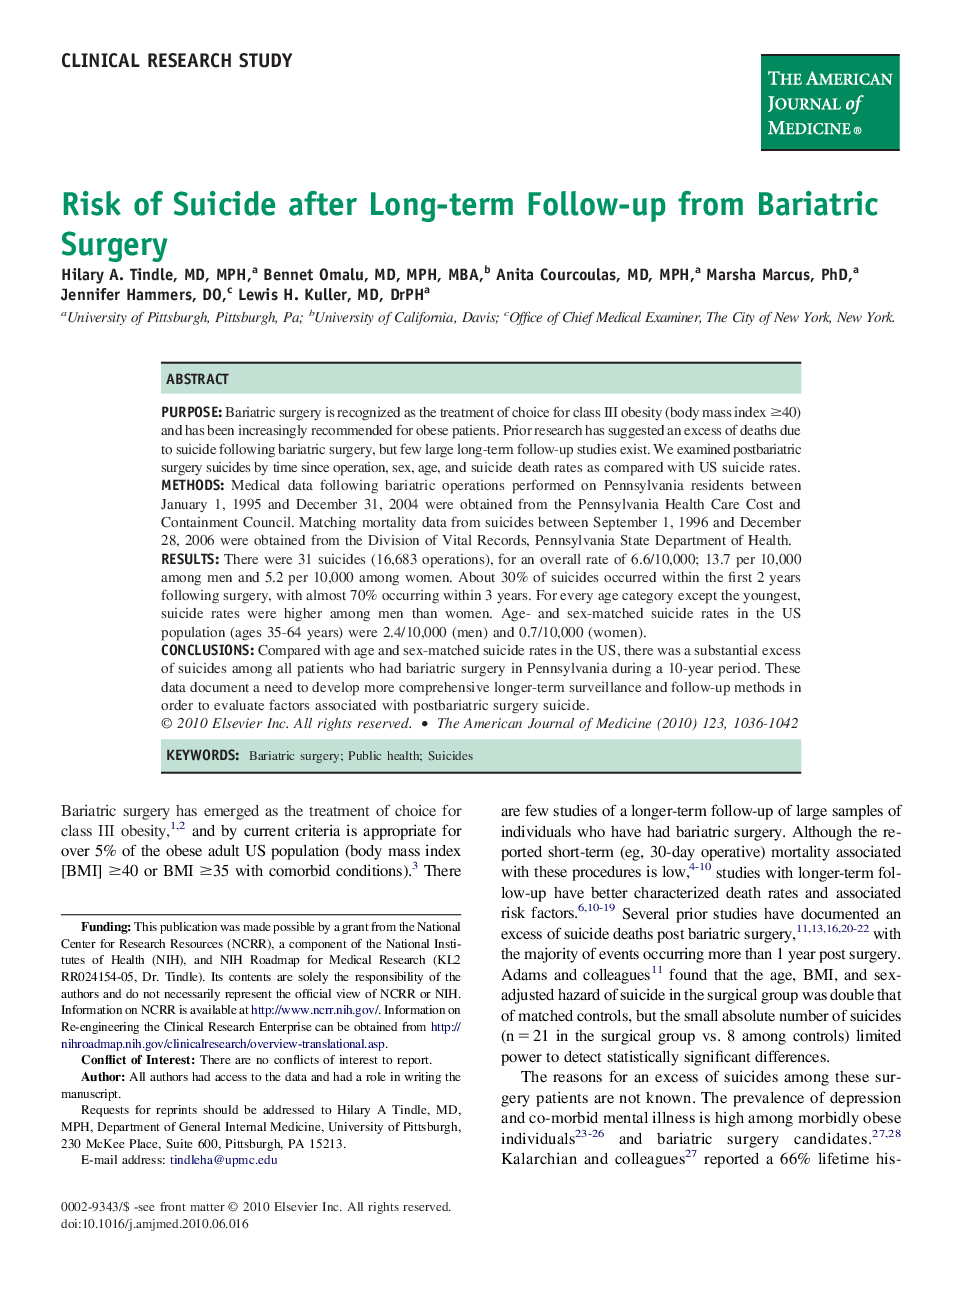 Risk of Suicide after Long-term Follow-up from Bariatric Surgery 